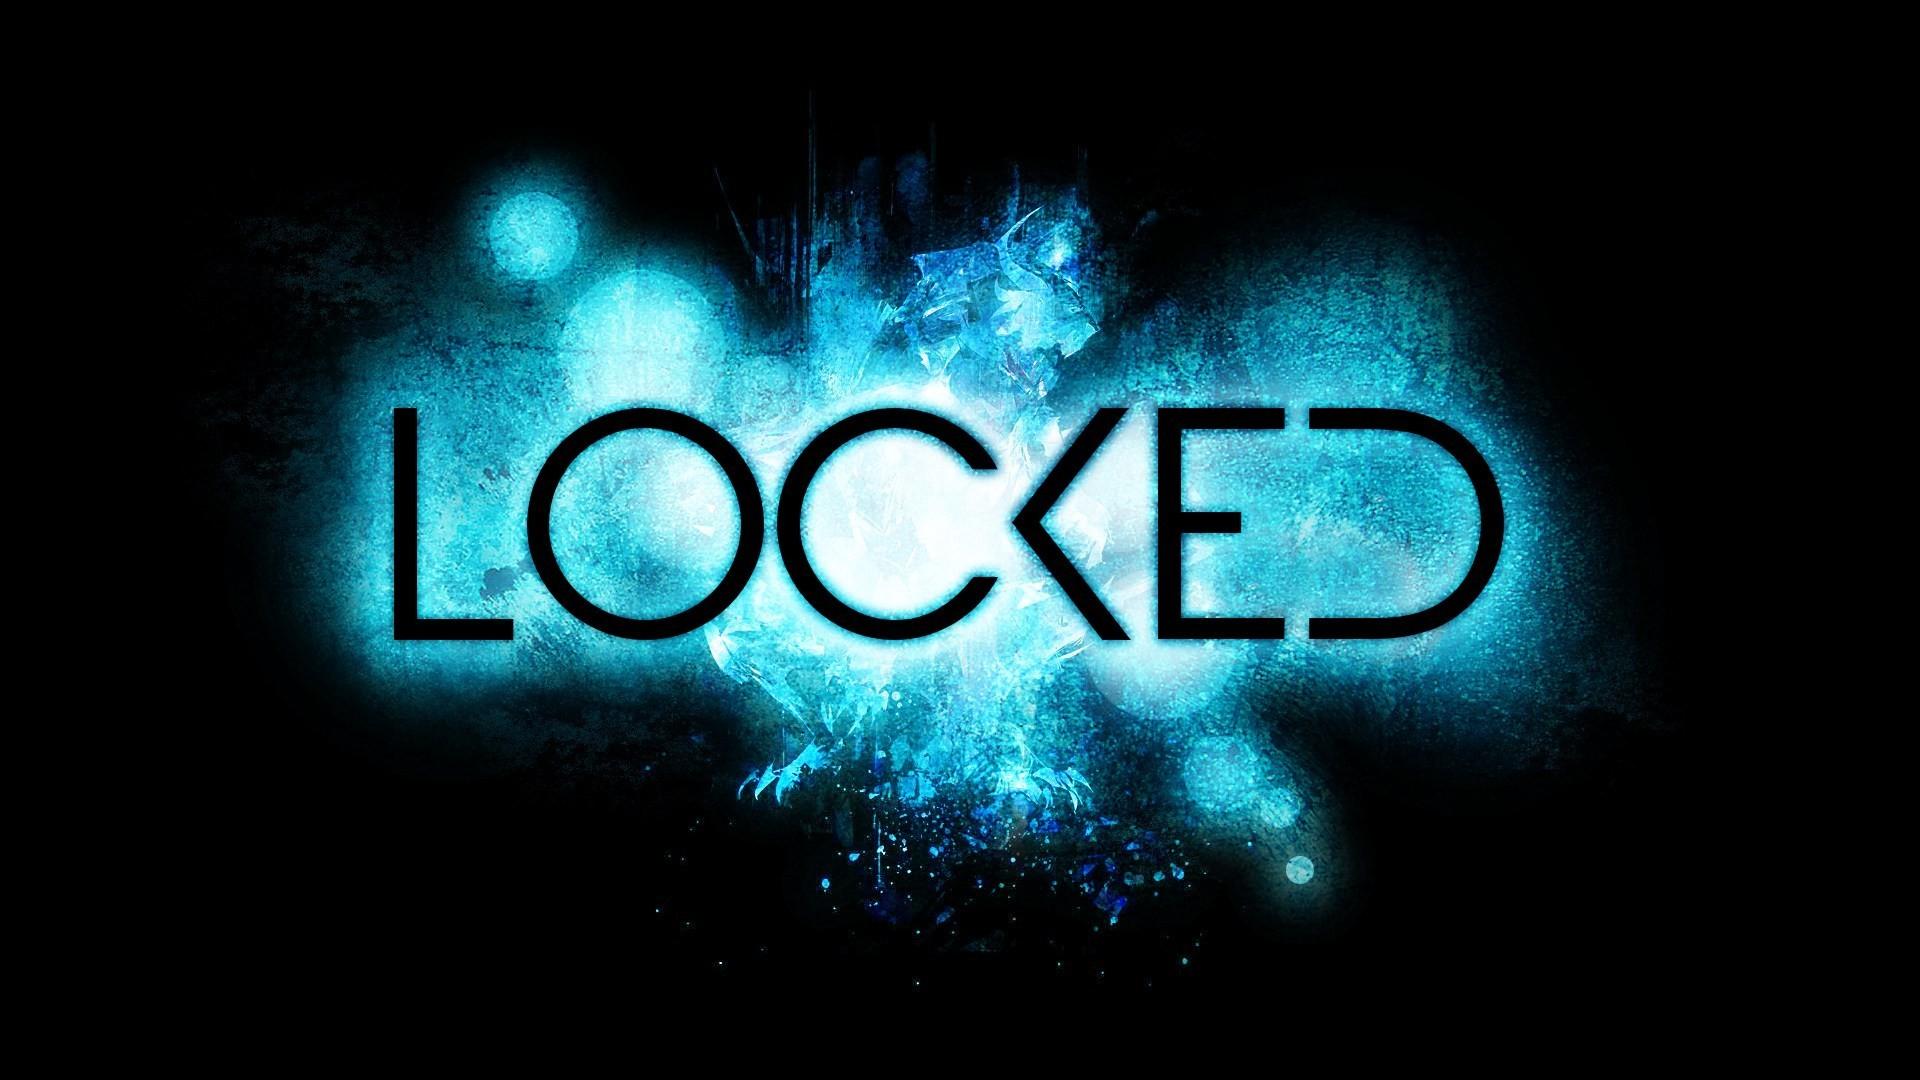 Blue Lock Draco Live Wallpaper | 3840x2160 - Rare Gallery HD Live Wallpapers